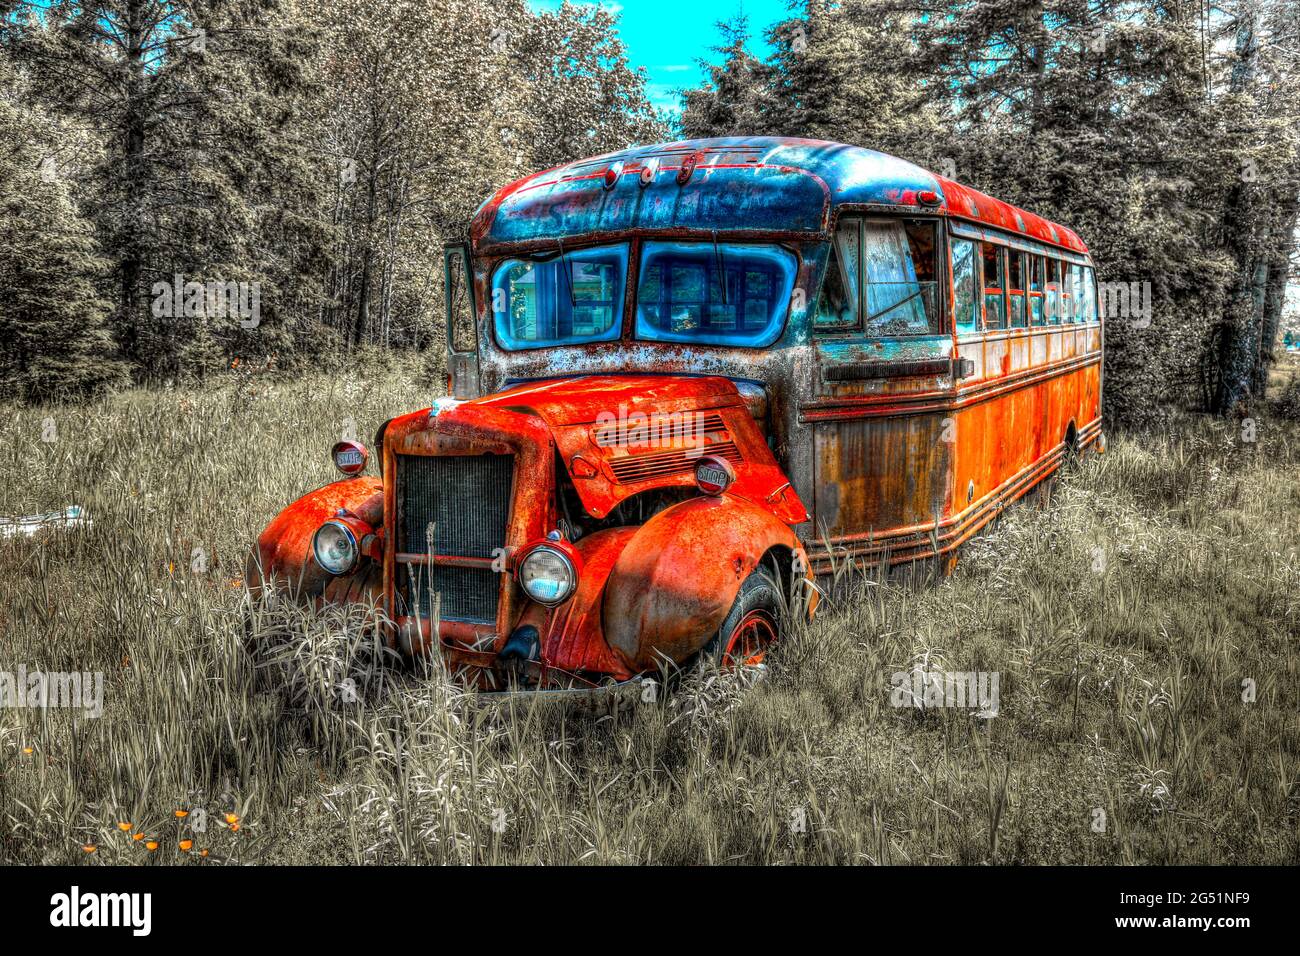 Abandoned old rusty bus standing on grass Stock Photo